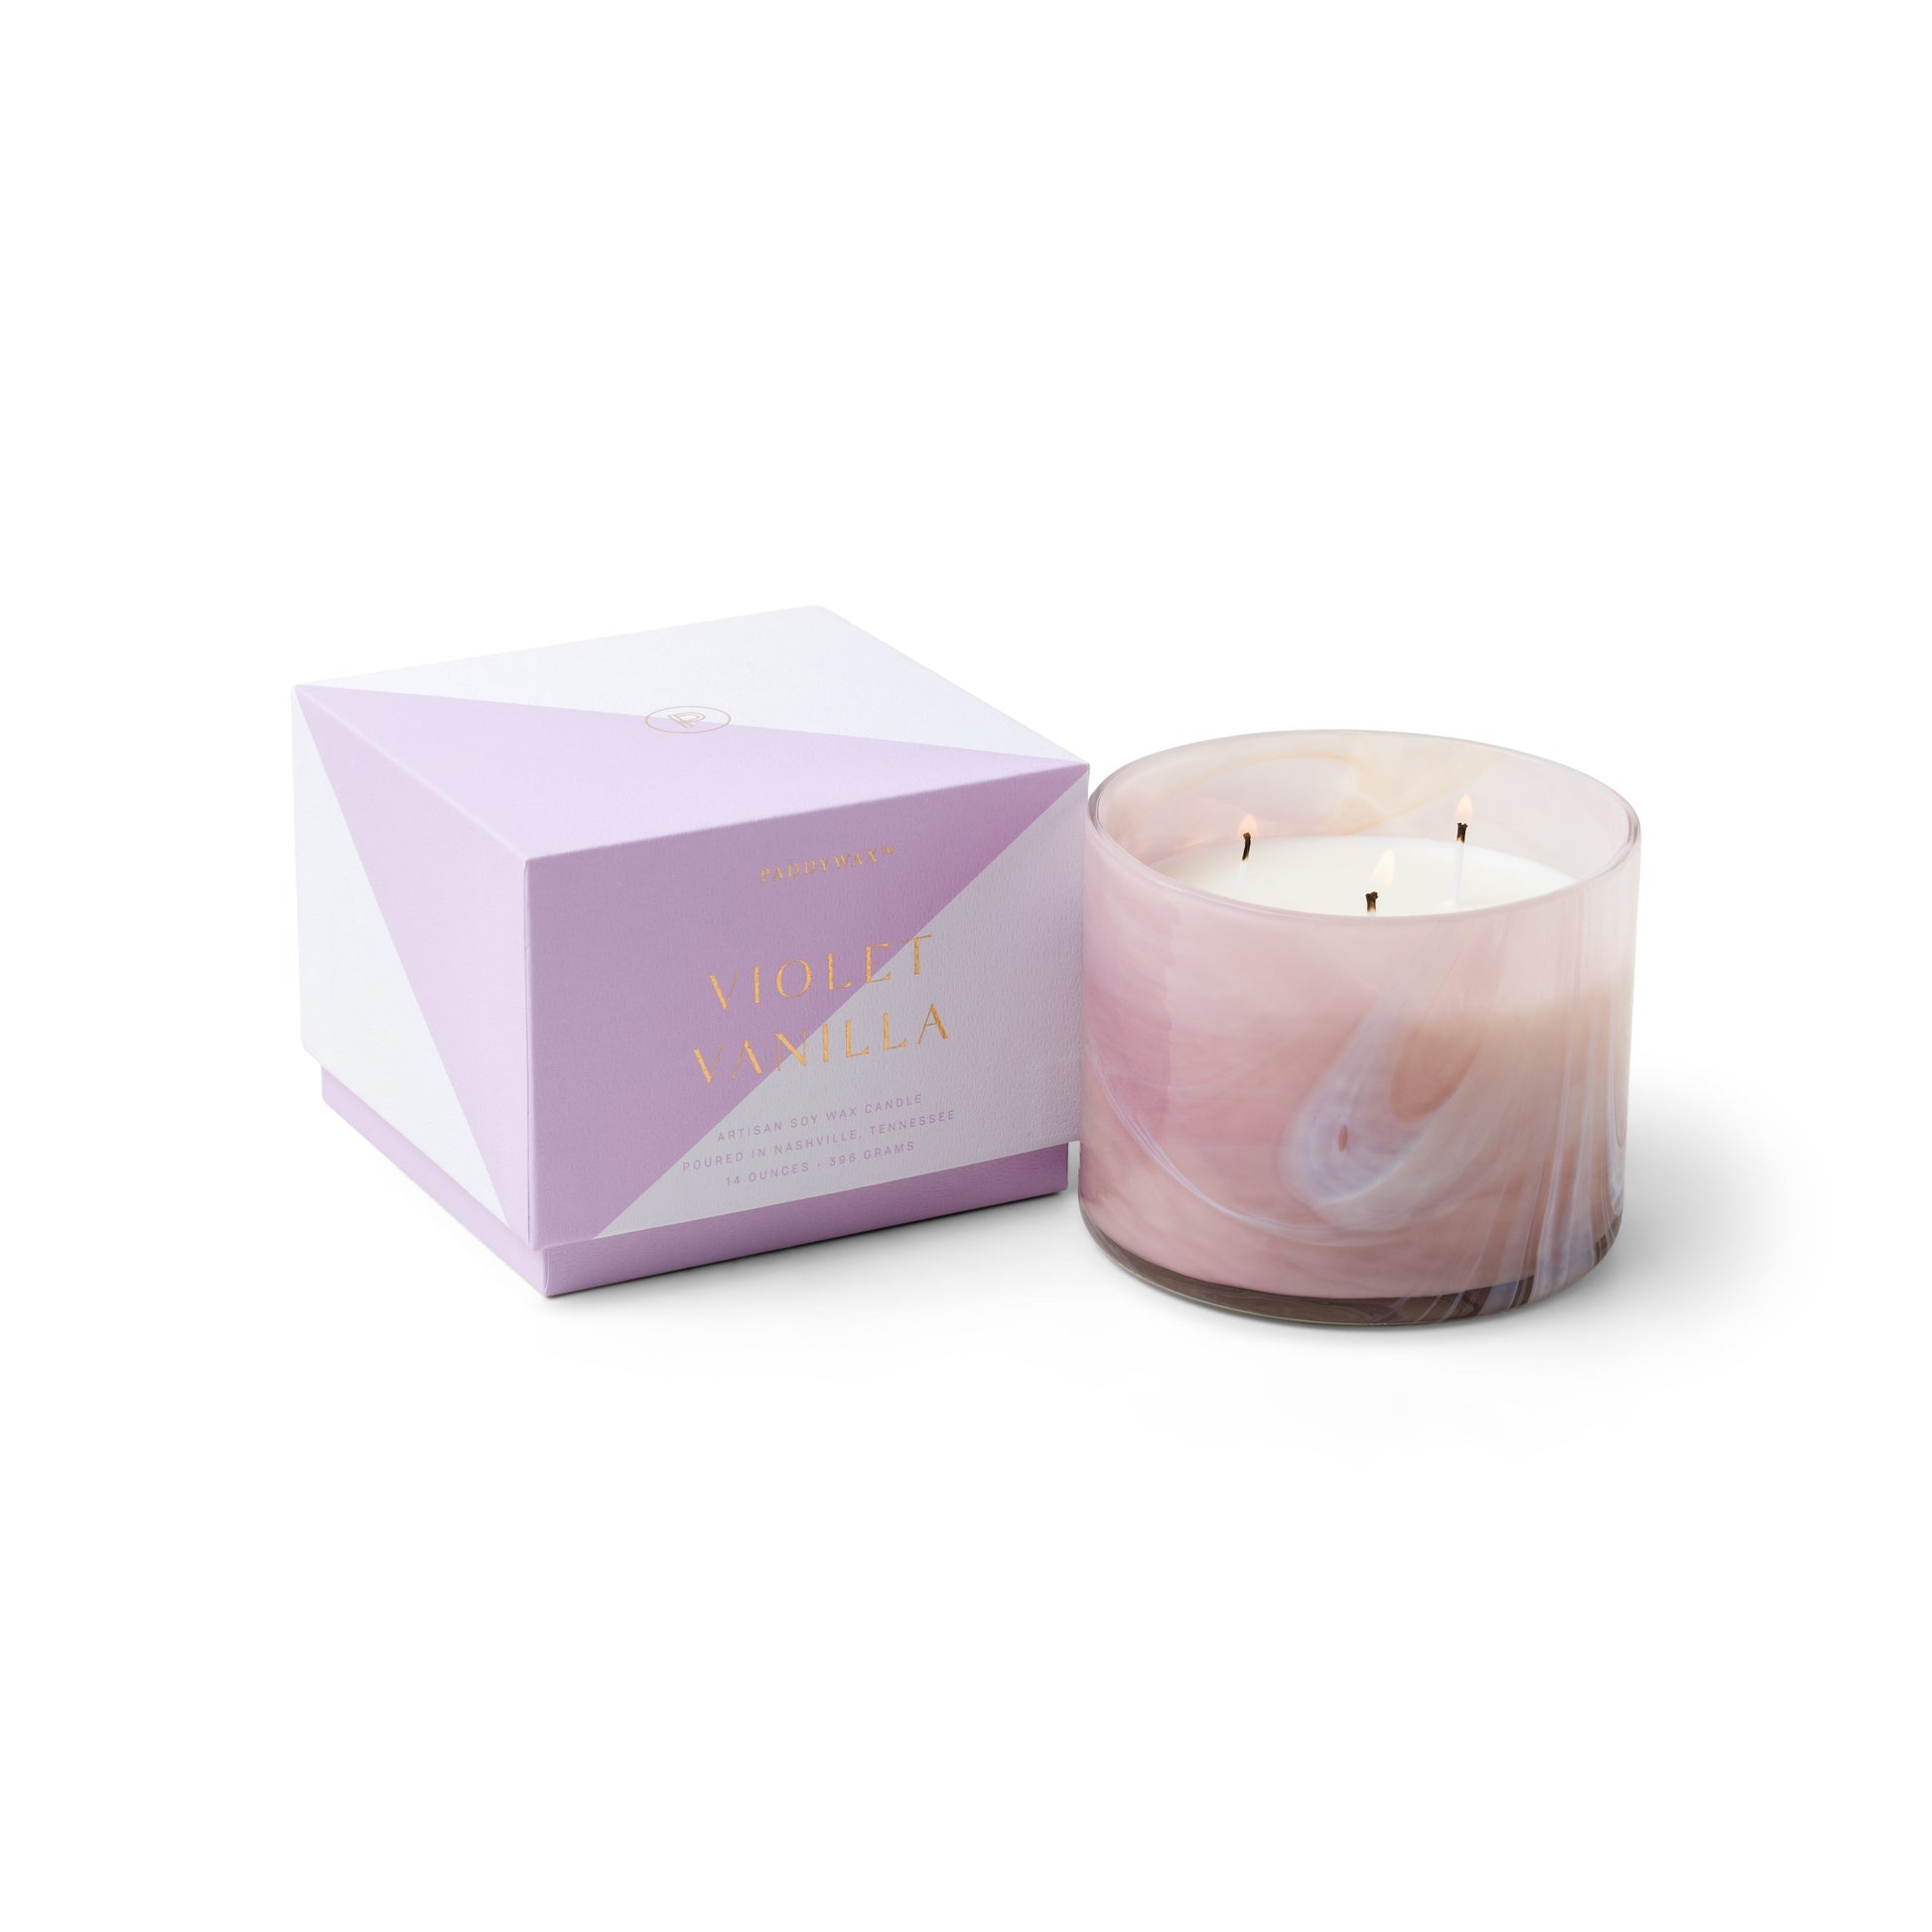 whirl 14oz candle and box side by side violet vanilla